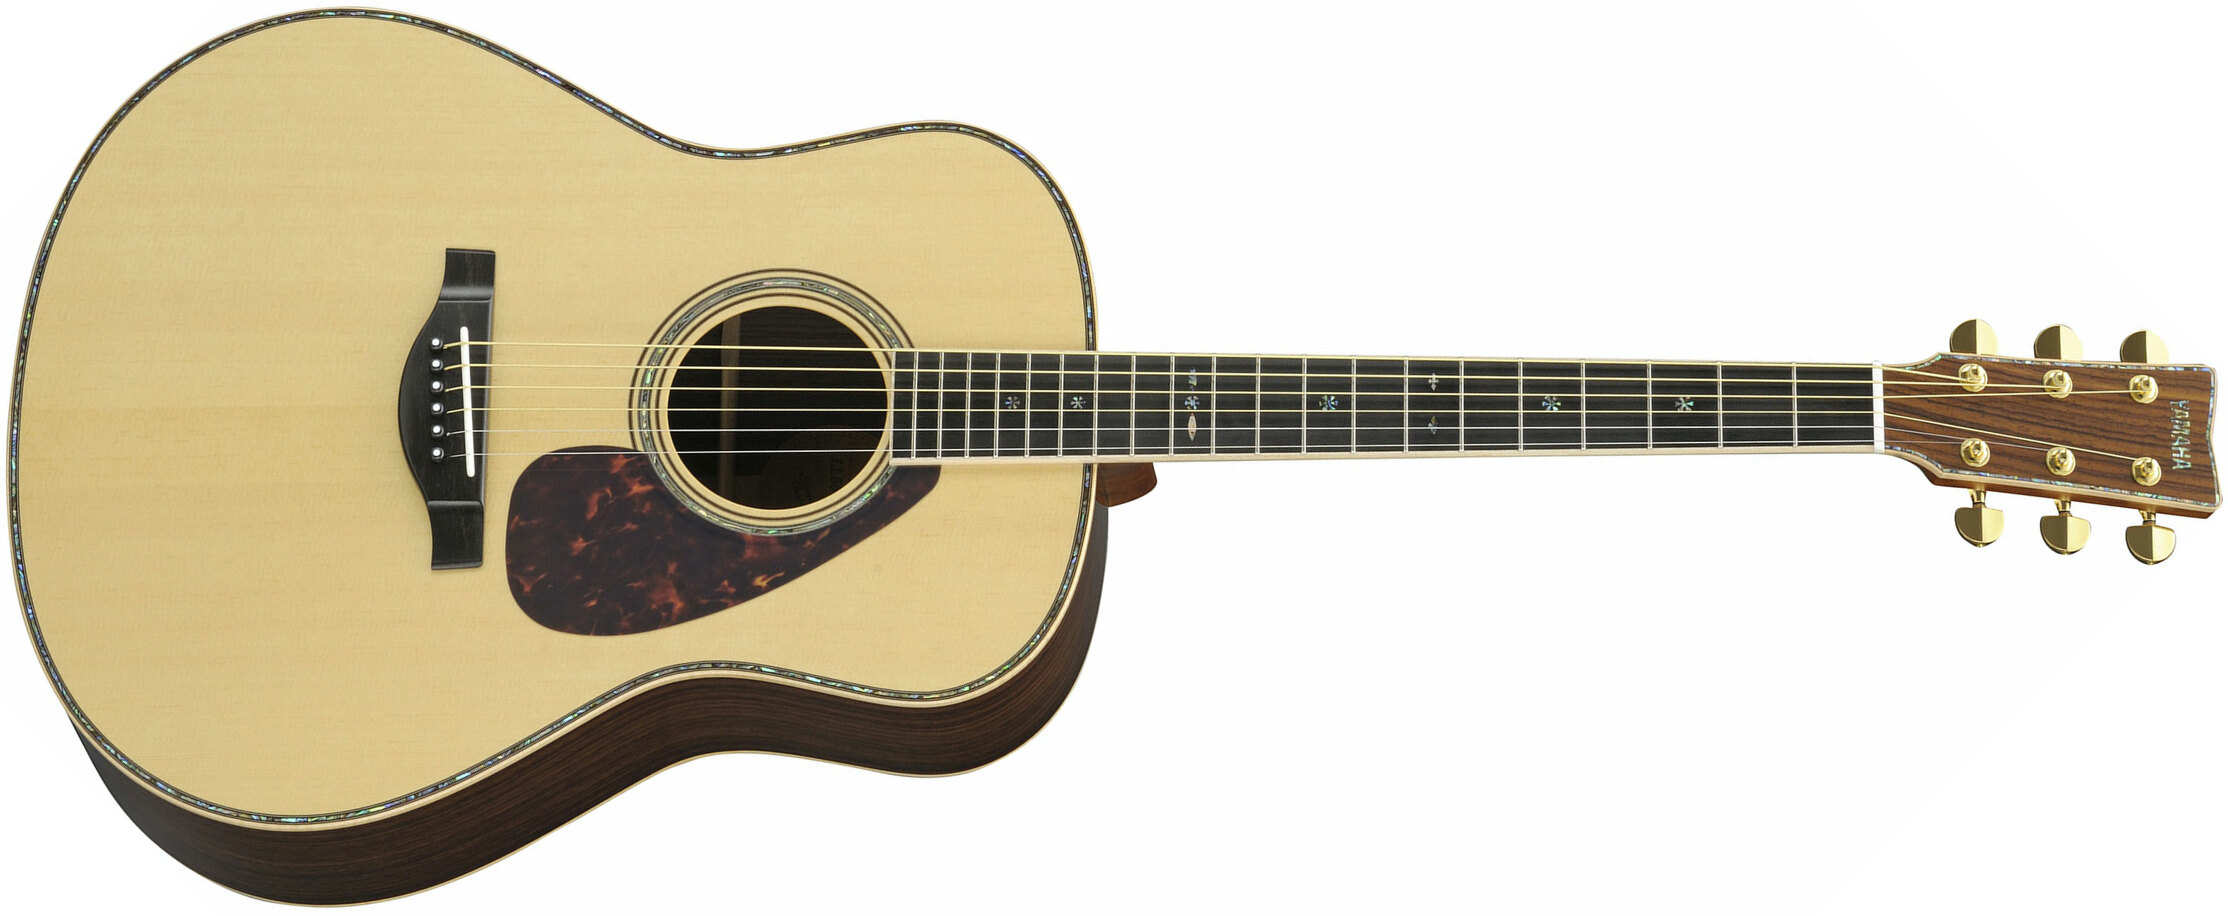 Yamaha Custom Shop Ll56 Areii Dreadnought Epicea Palissandre Eb - Natural - Electro acoustic guitar - Main picture